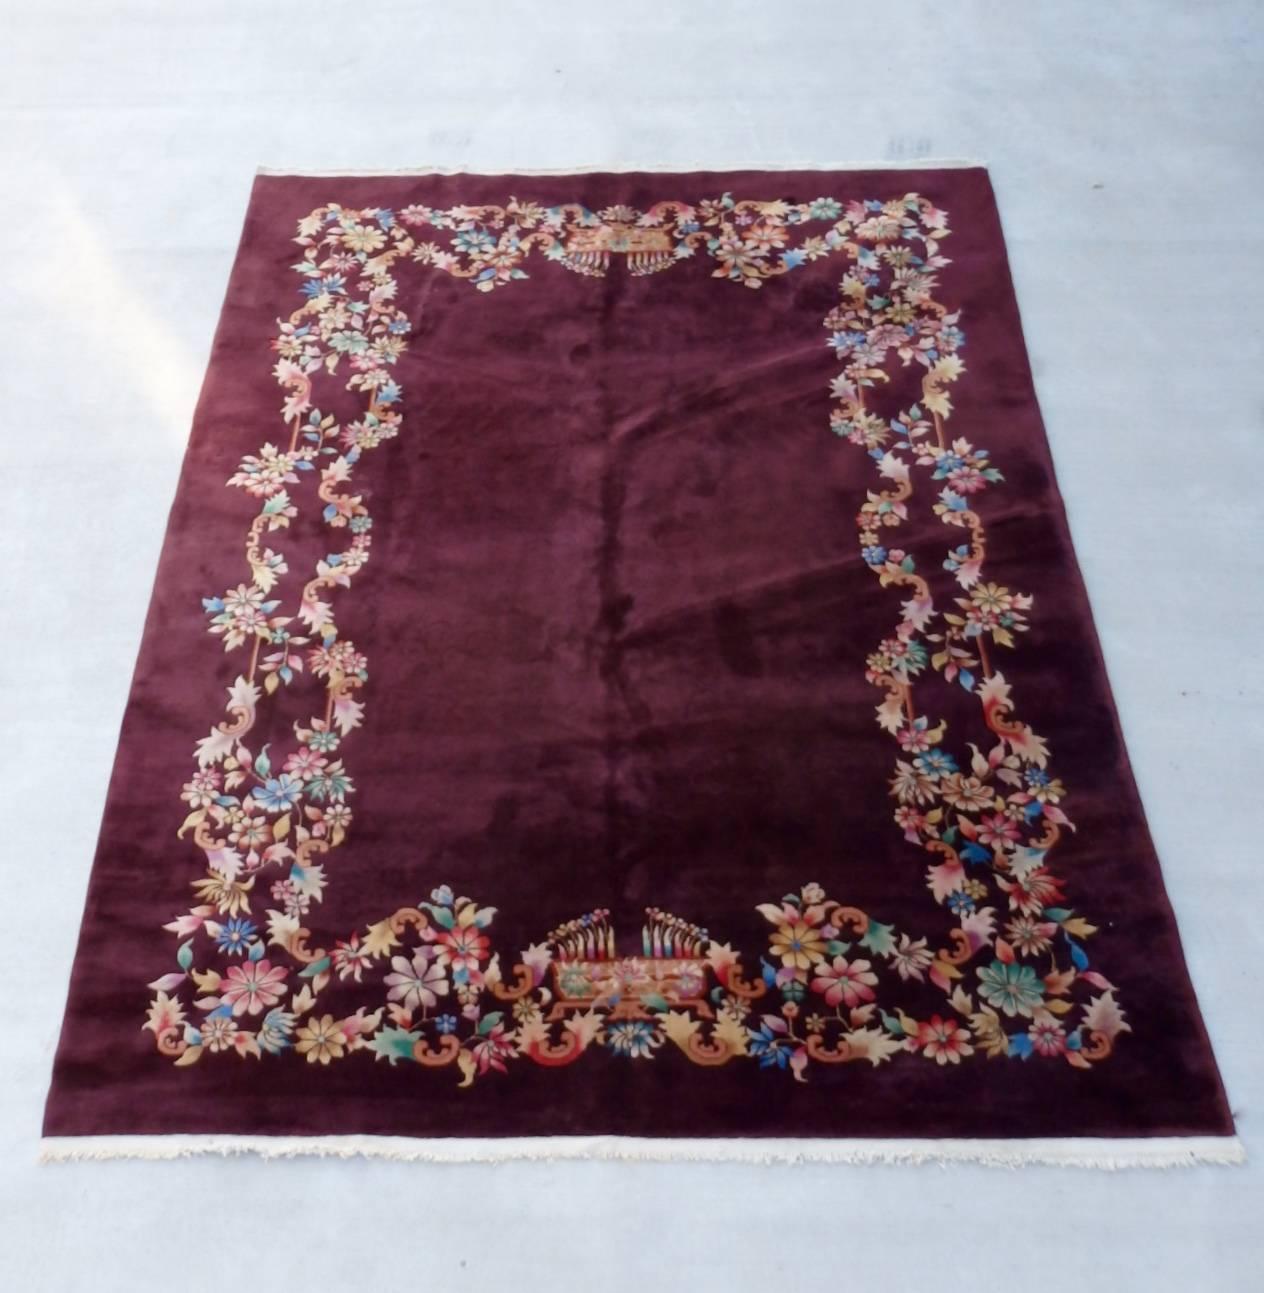 Beautiful Nichols wool rug in excellent condition. Field is a deep sable brown. A mix of claret red wine and black coffee. Colorful intertwined floral border. There is also a tracing ghost floral pattern throughout the brown field.